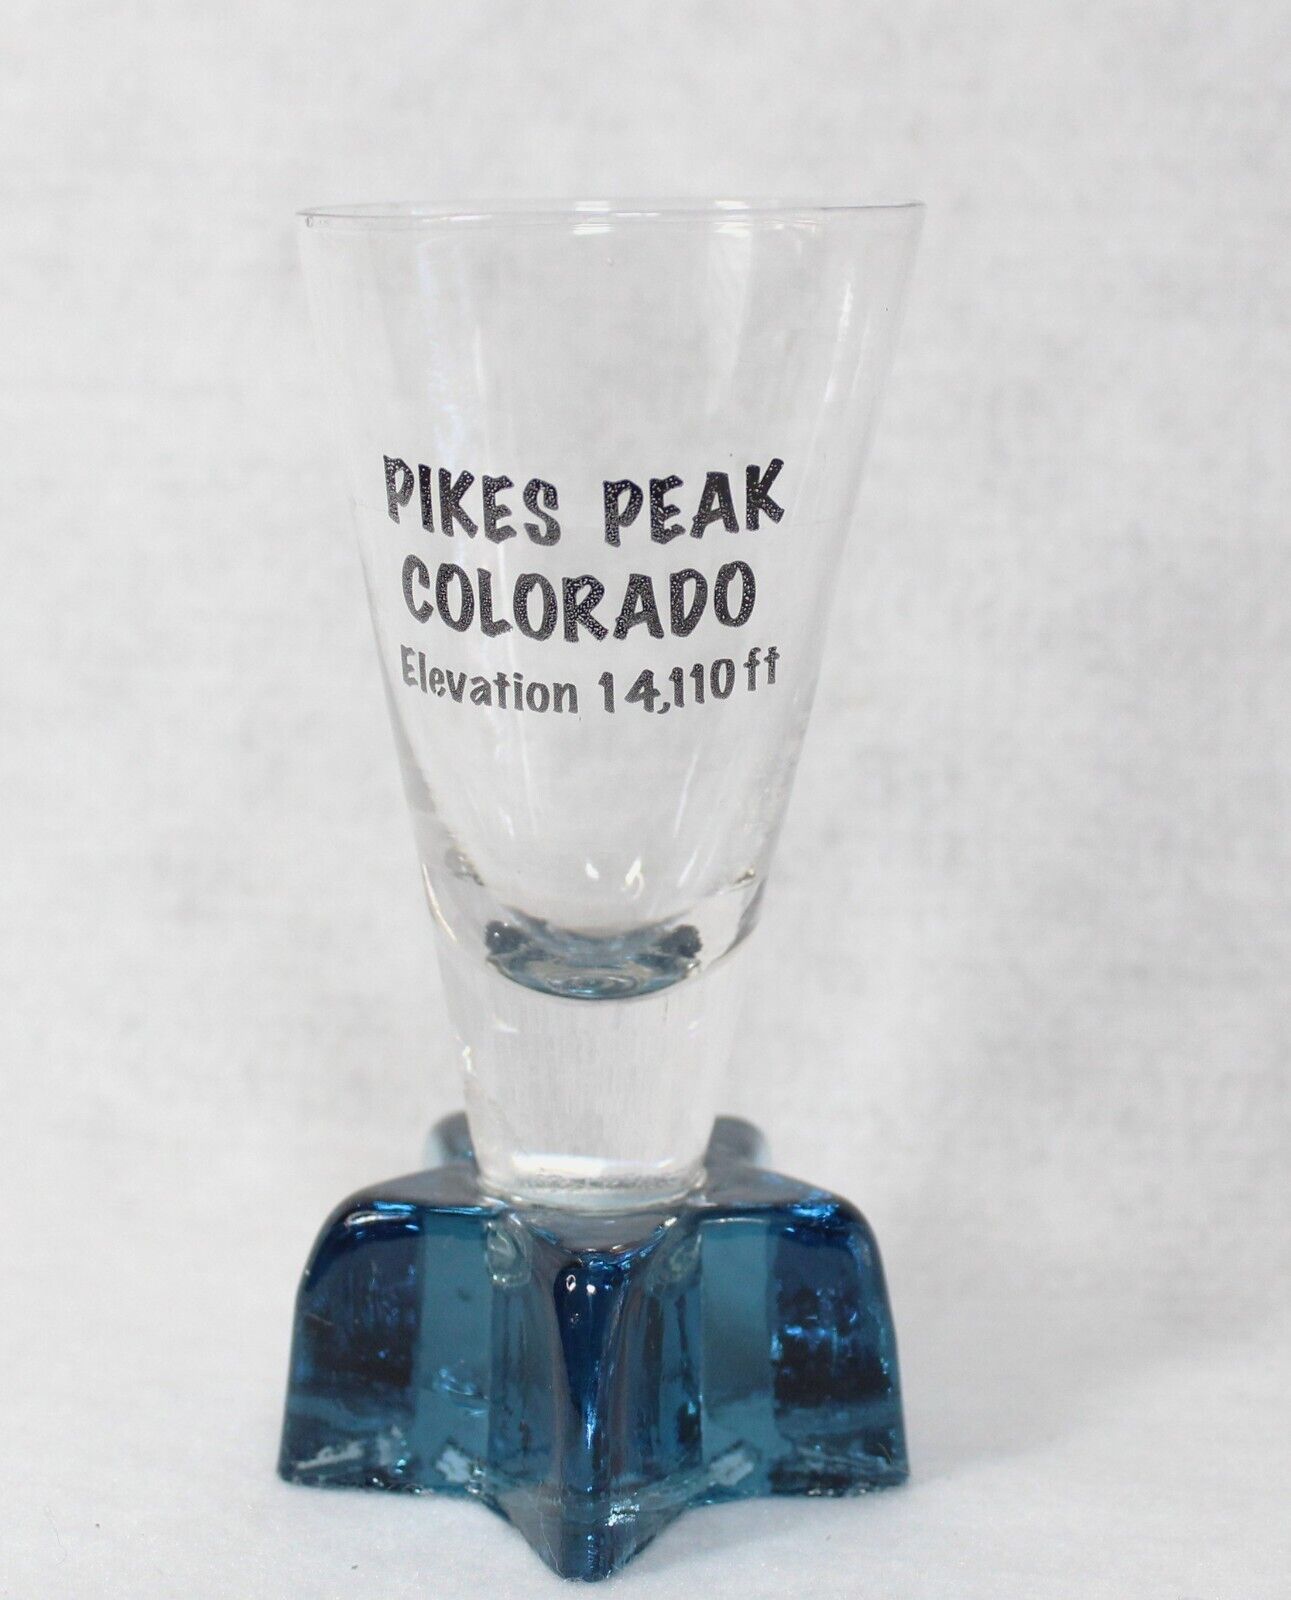 VERY UNUSUAL SHOT GLASS FROM PIKES PEAK, COLORADO